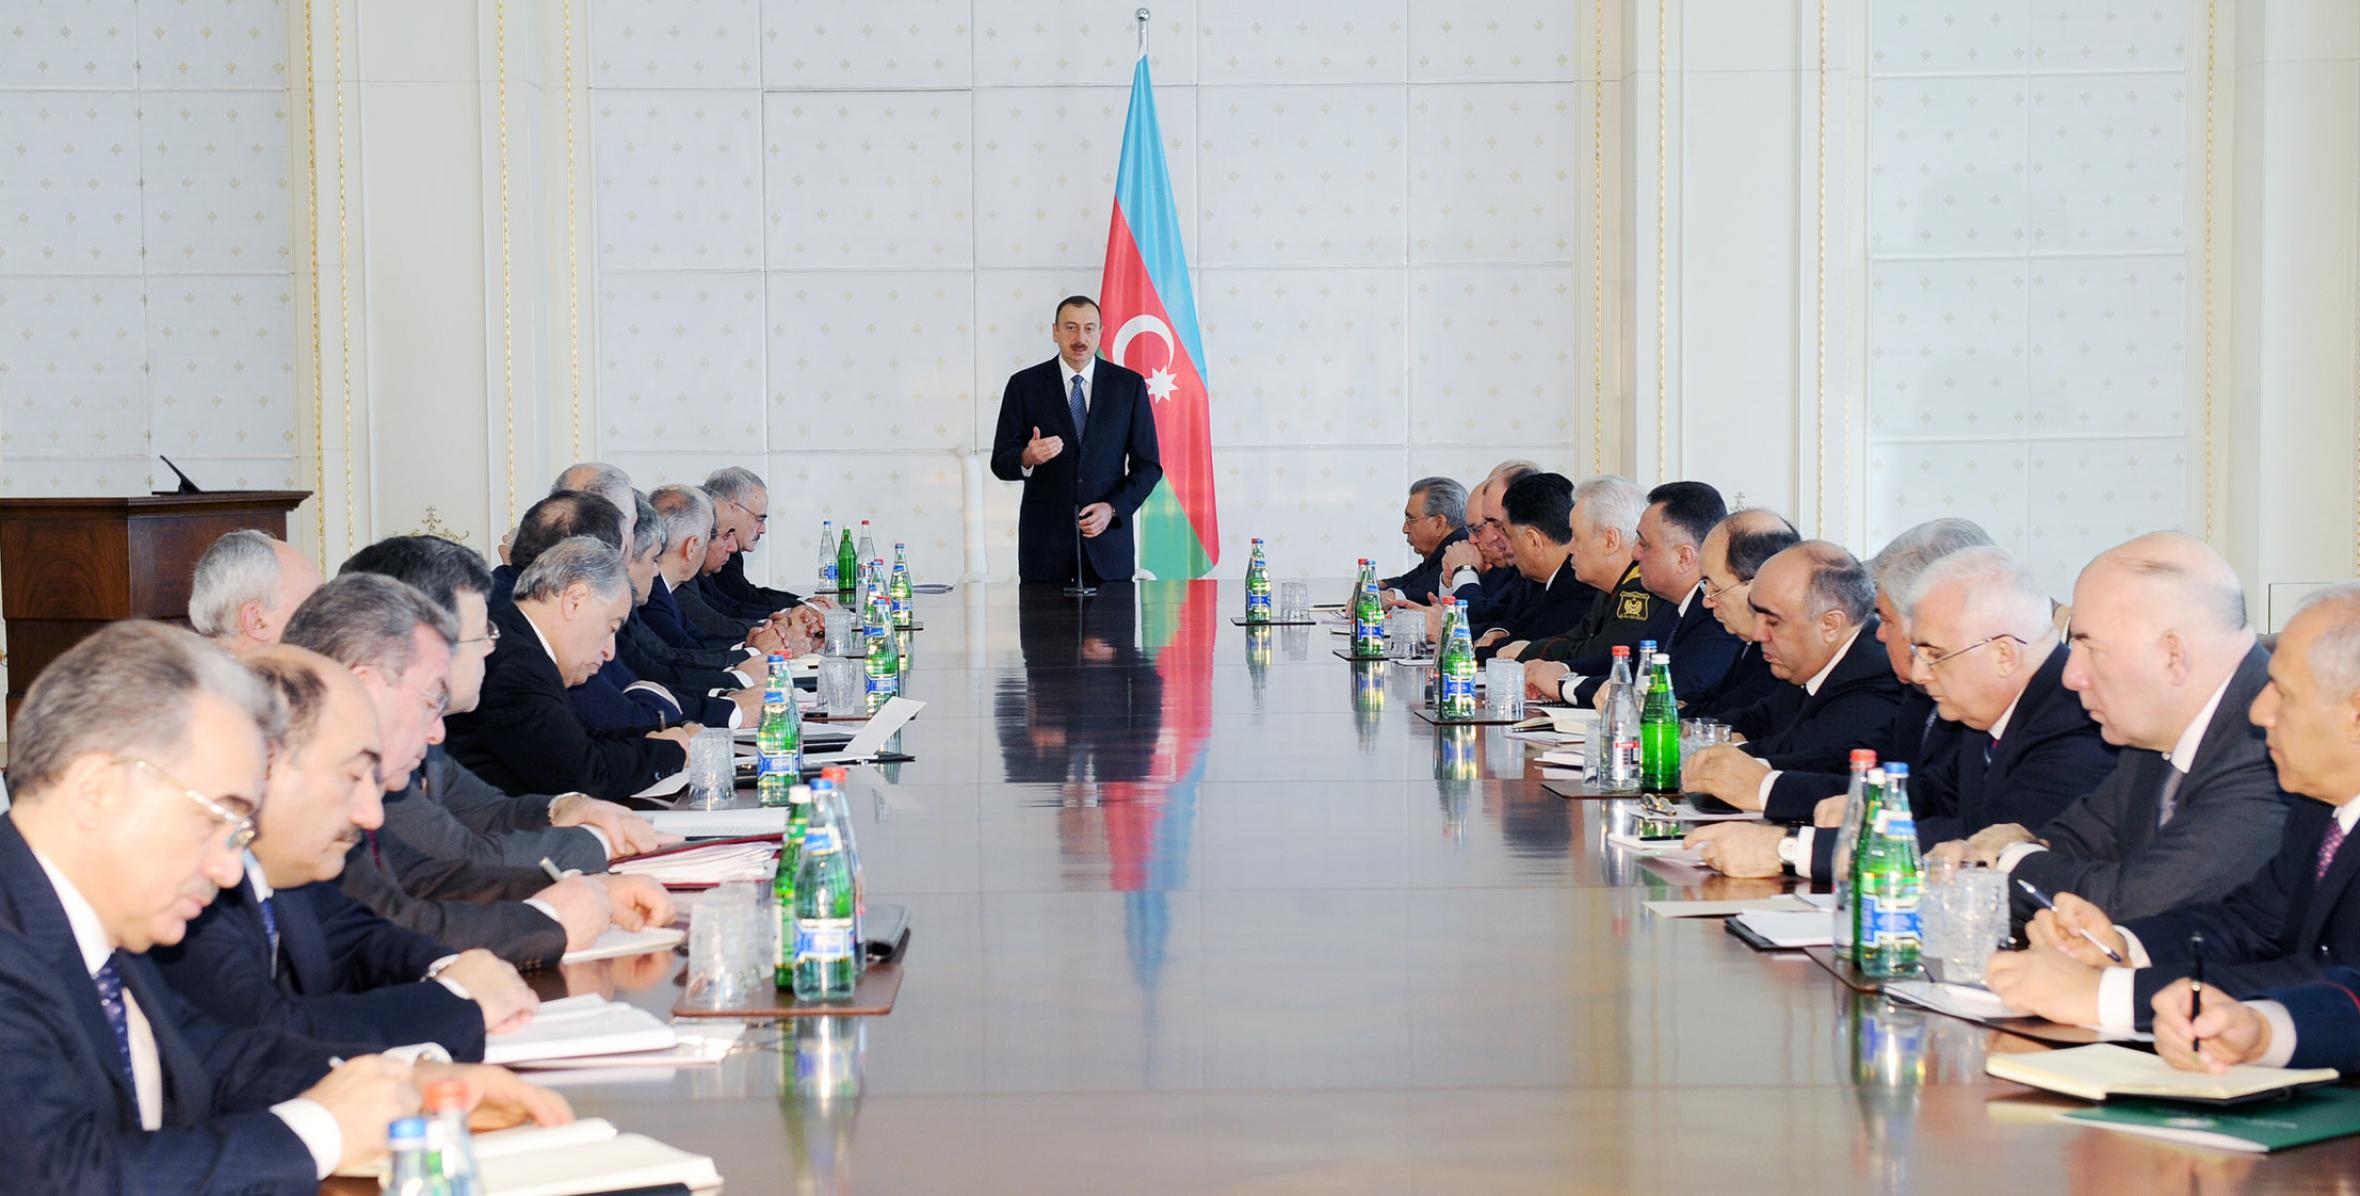 Opening speech by Ilham Aliyev at the meeting of the Cabinet of Ministers of the Republic of Azerbaijan dedicated to the results of the socioeconomic development in the first quarter of 2012 and future goals.